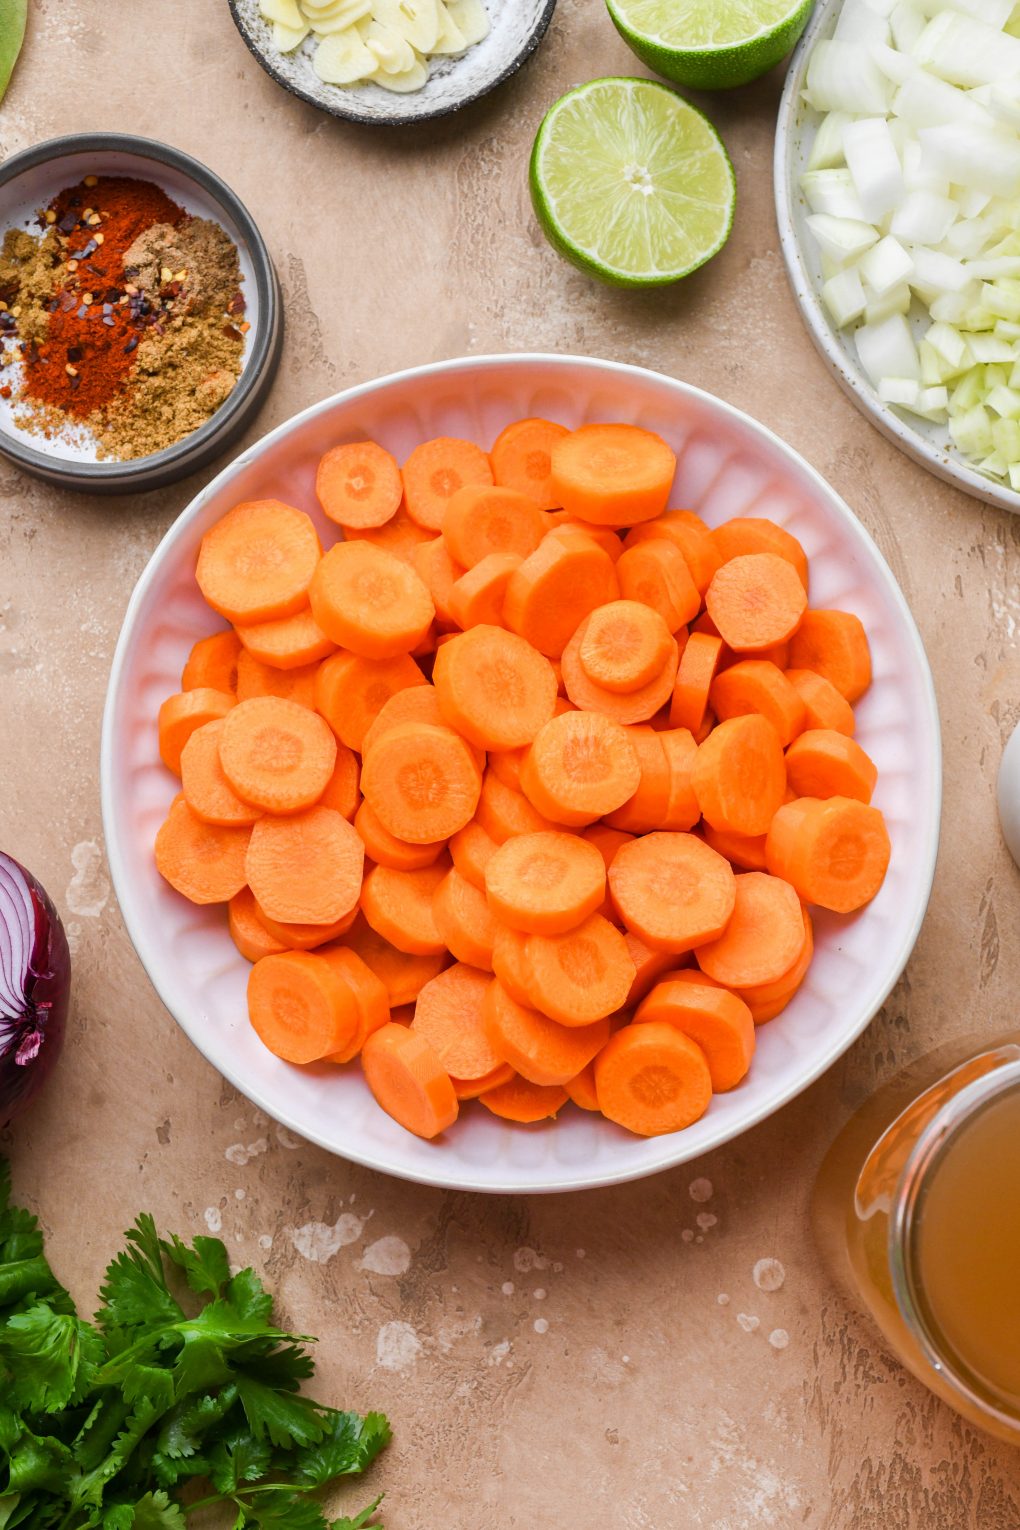 Image of ingredients for creamy carrot soup - sliced carrots in a large bowl, diced onion and fennel, chopped garlic, spices, red onion, cilantro, broth, and limes. On a light brown background.